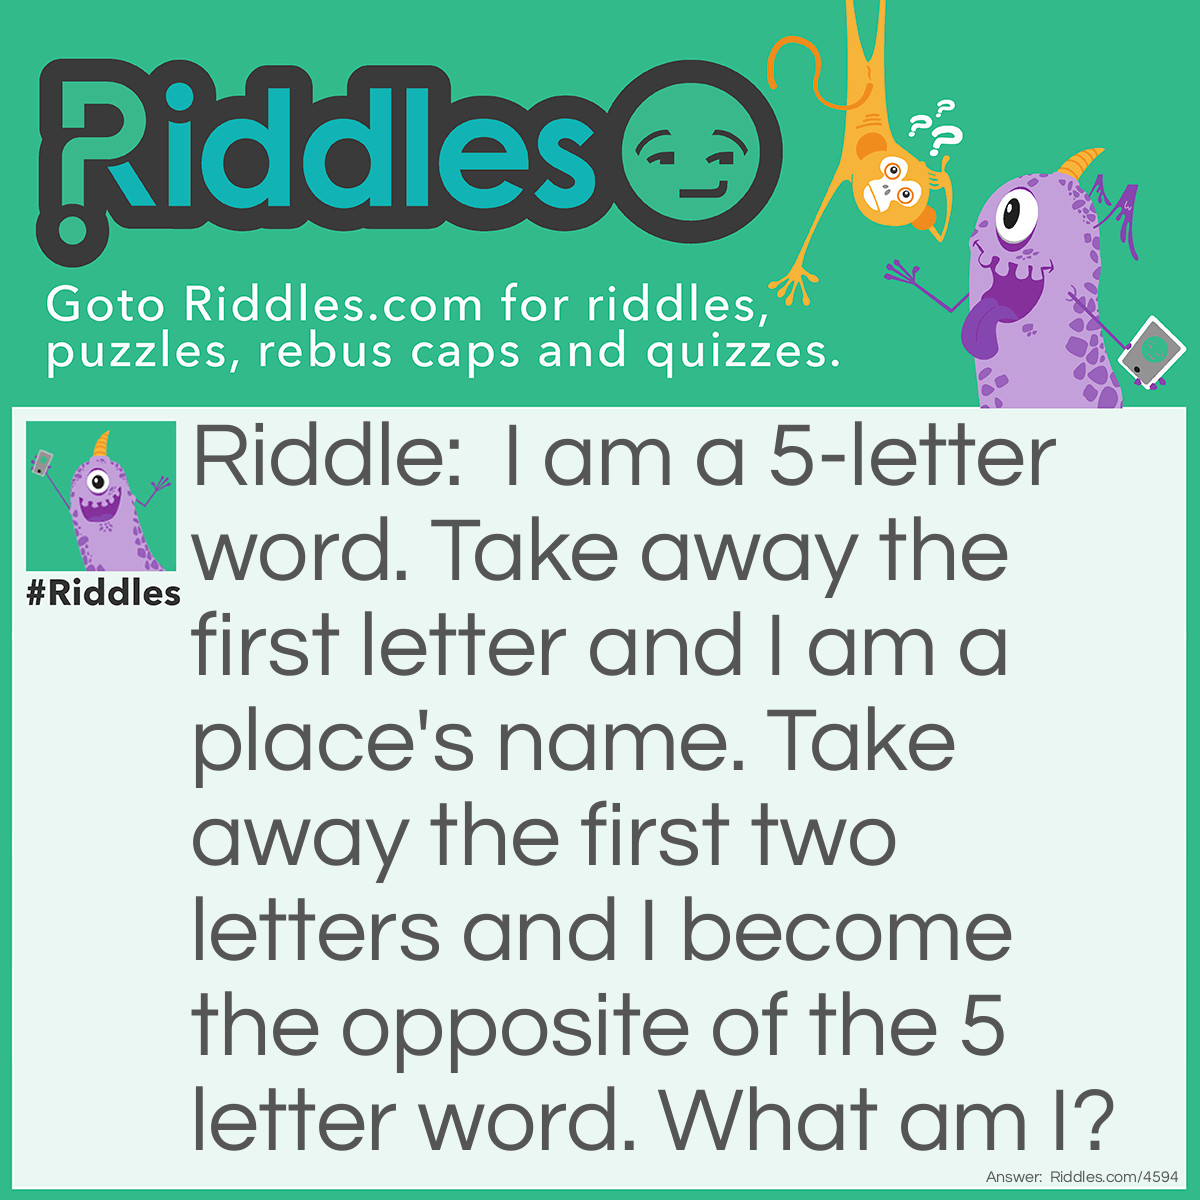 Riddle: I am a 5-letter word. Take away the first letter and I am a place's name. Take away the first two letters and I become the opposite of the 5 letter word. <a href="https://www.riddles.com/who-am-i-riddles">Who am I</a>? Answer: Woman, oman, man.